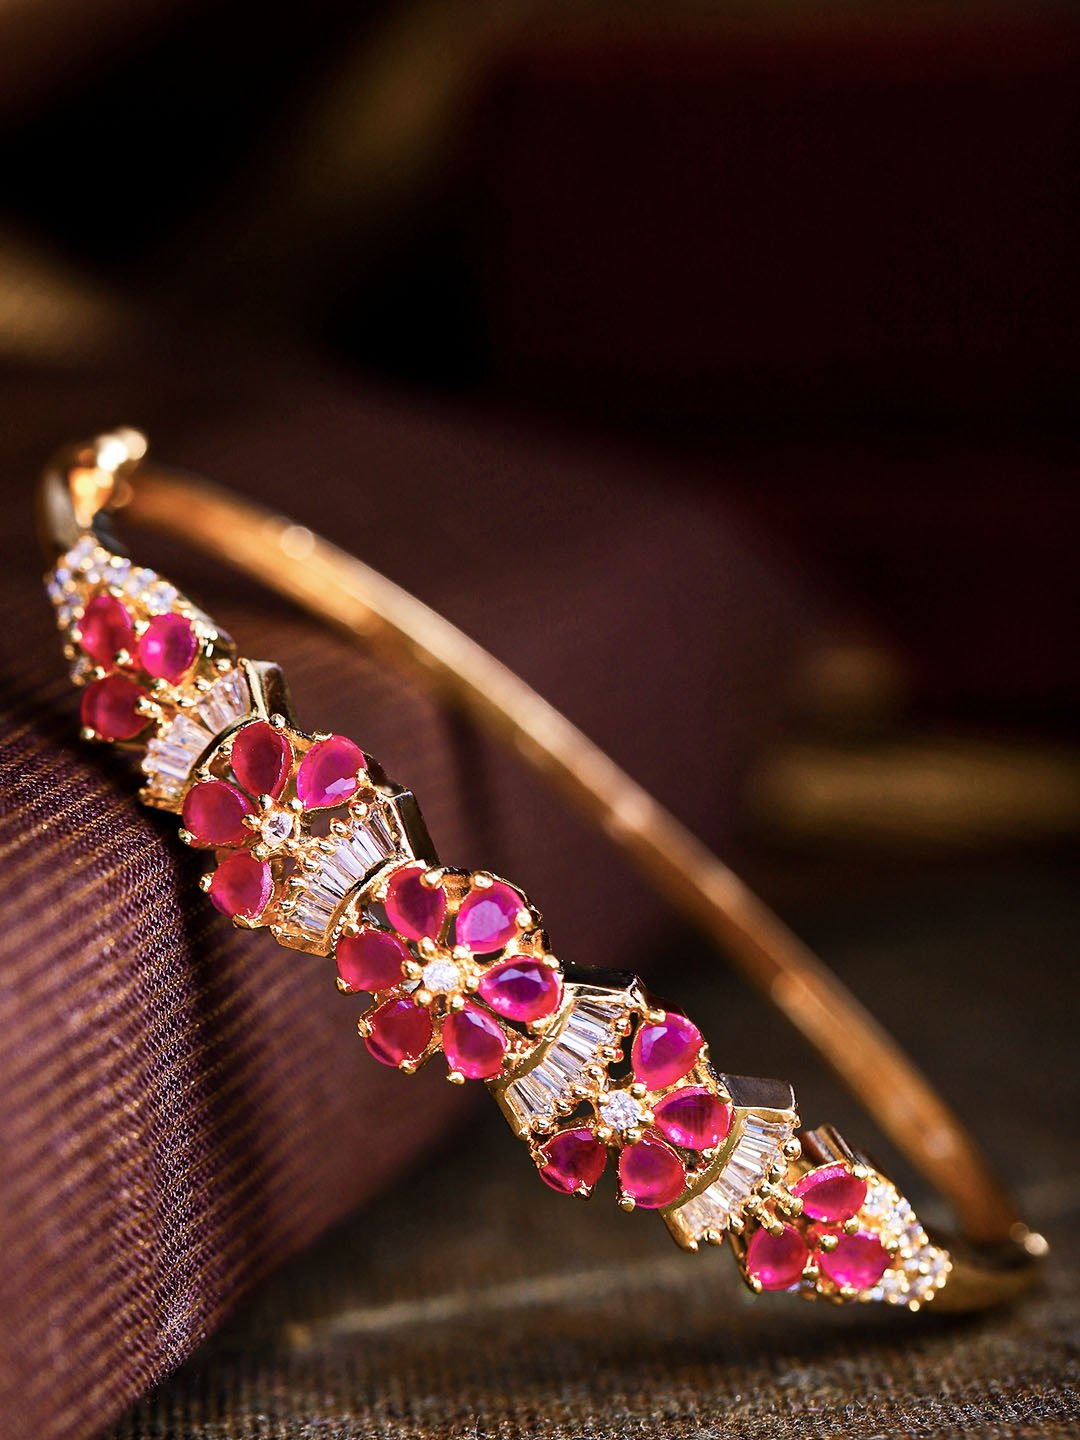 American Diamond and Ruby Stones Studded Floral Patterned Bracelet in Magenta Color